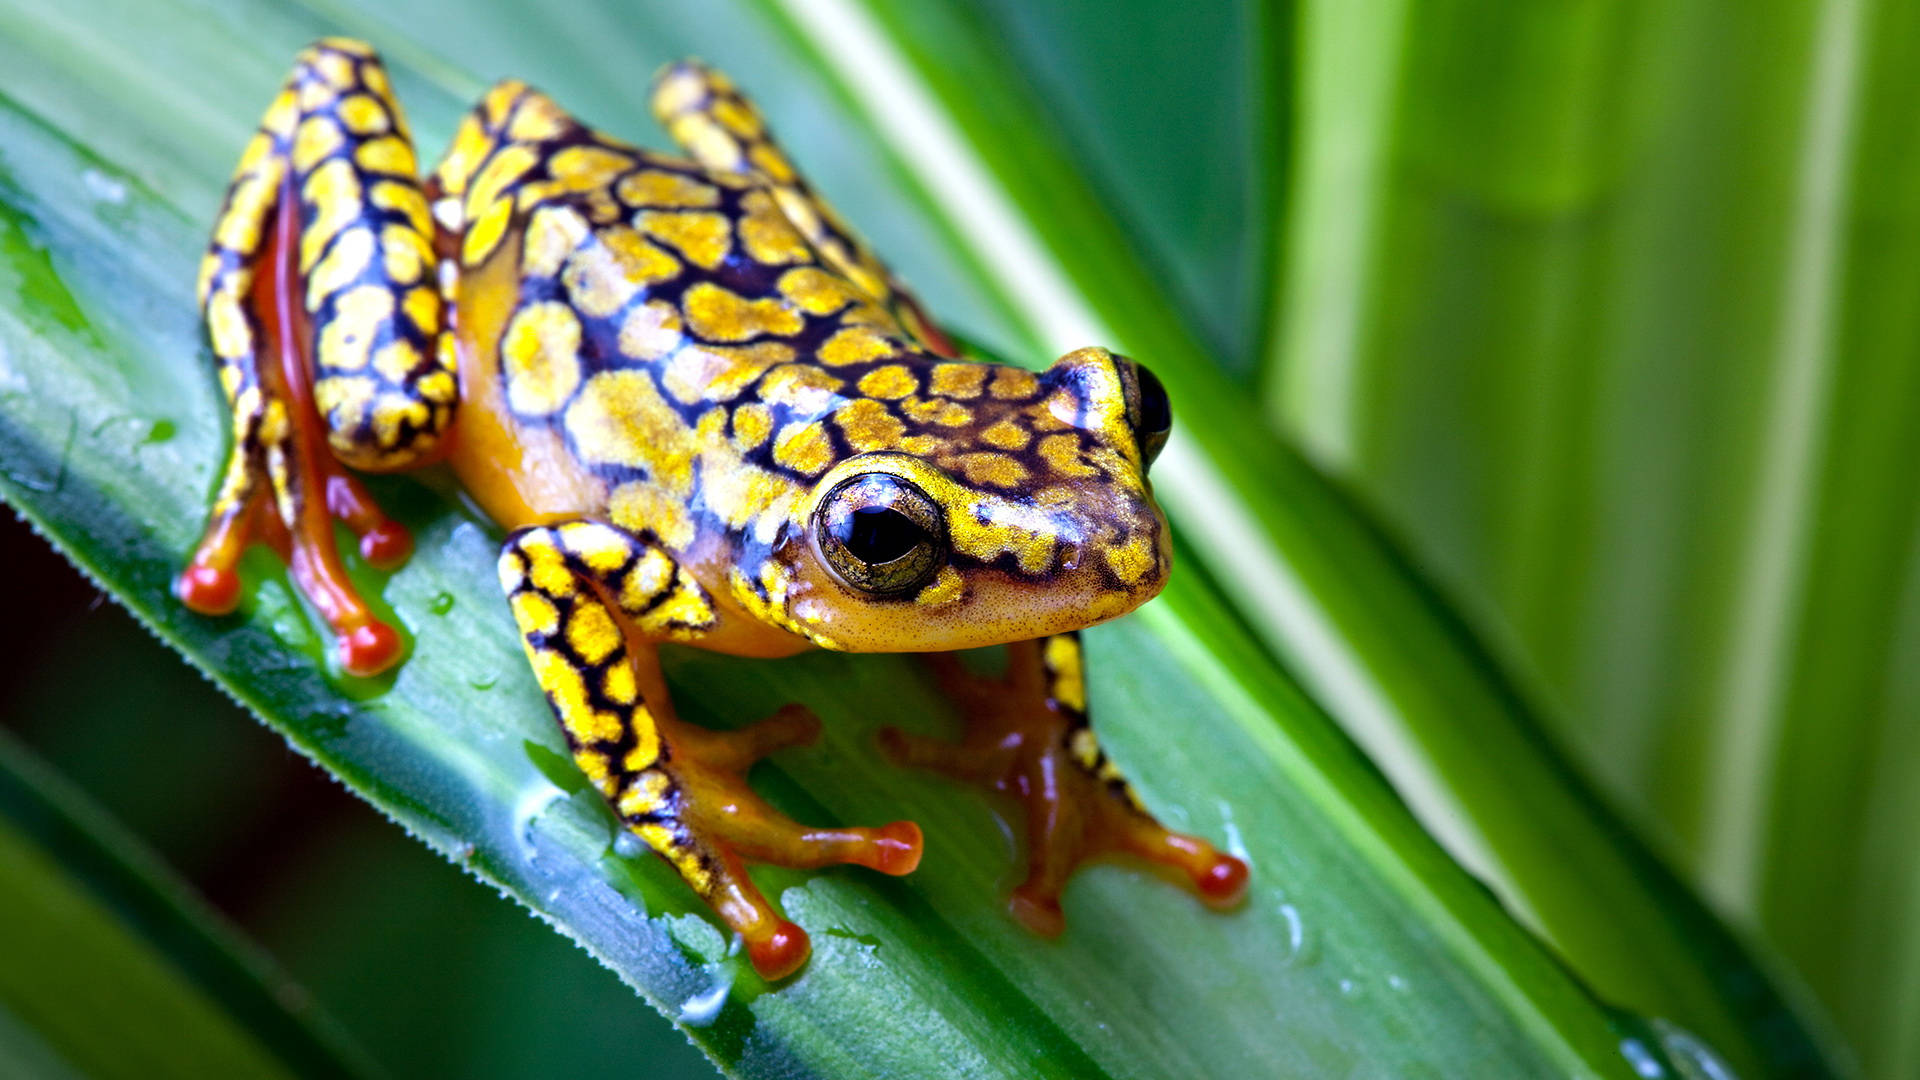 Cute Frog With Yellow Dots Pattern